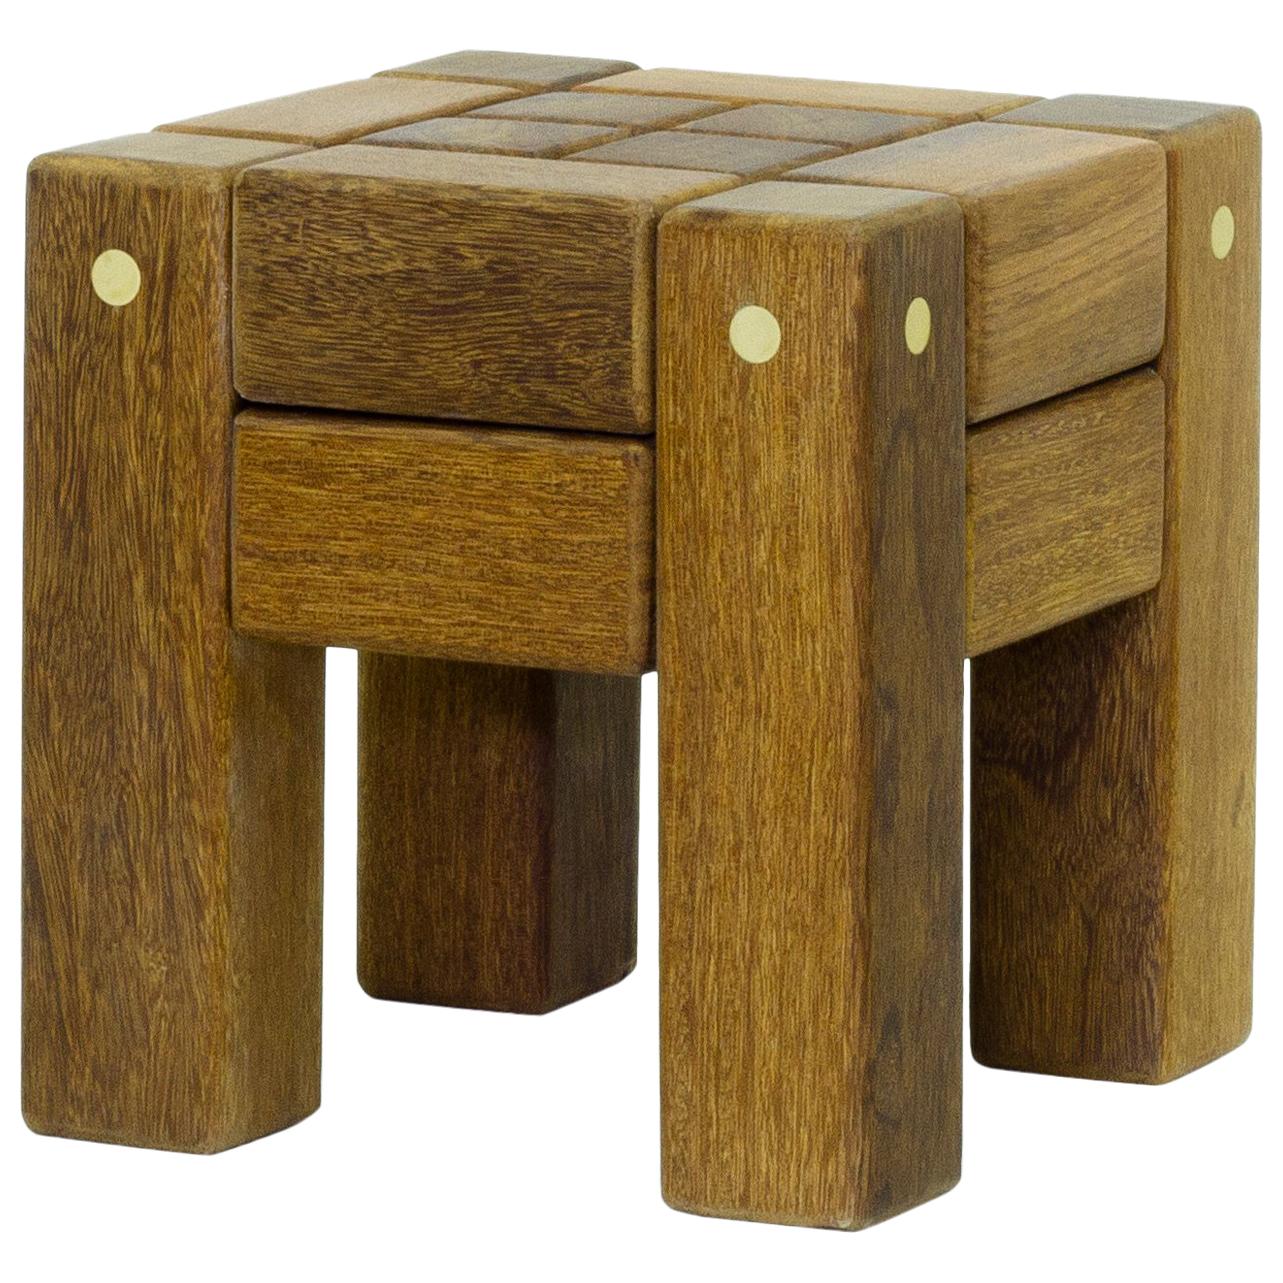 Stool in Hardwood and Brass. Brazilian Contemporary Design by O Formigueiro. im Angebot